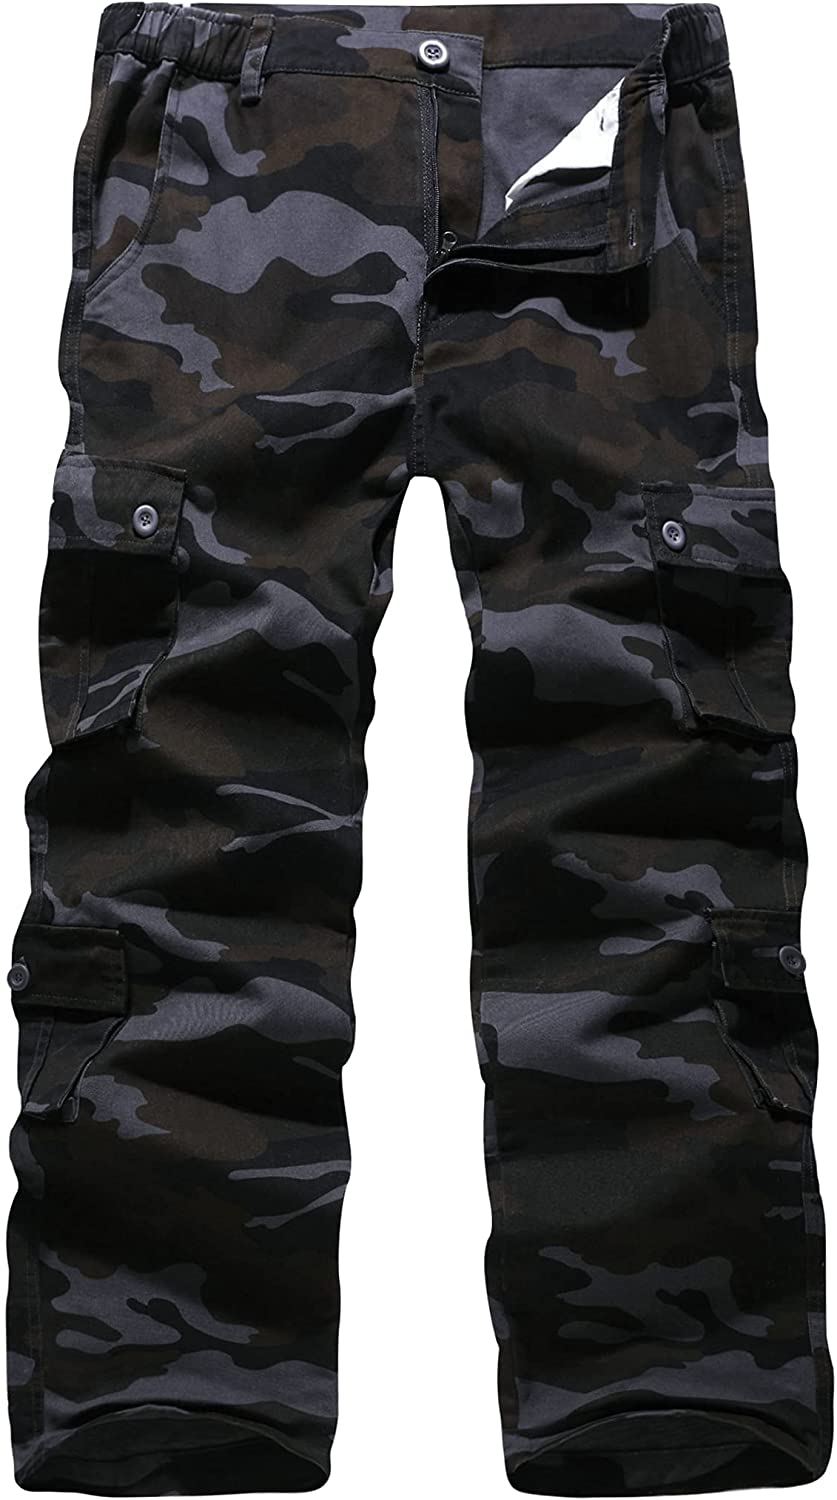 Mens Relaxed-Fit Cargo Pants Multi Pocket Military Camo Combat Work Pants